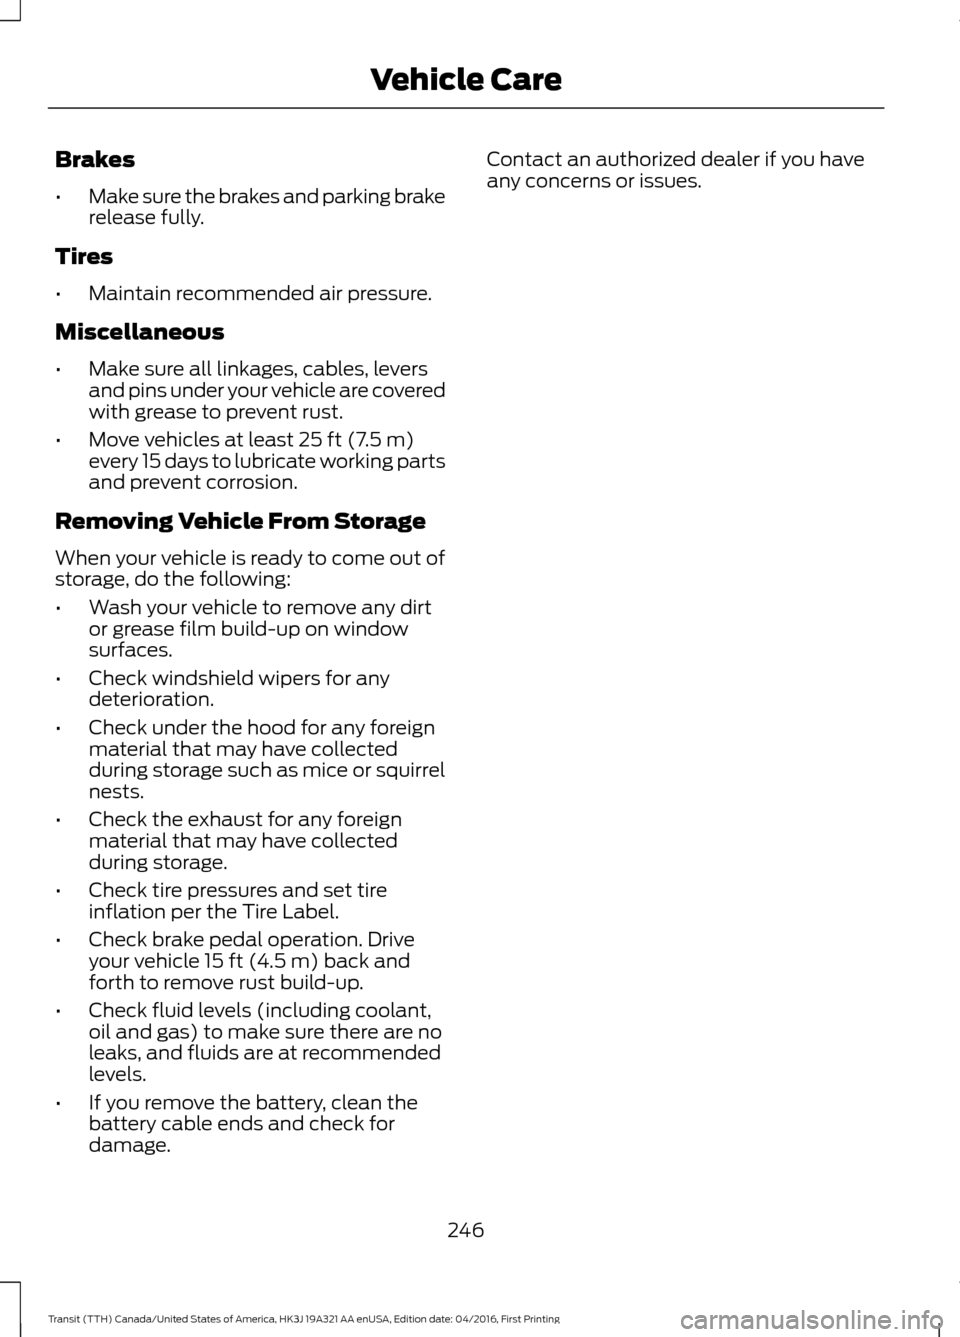 FORD TRANSIT 2017 5.G Owners Manual Brakes
•
Make sure the brakes and parking brake
release fully.
Tires
• Maintain recommended air pressure.
Miscellaneous
• Make sure all linkages, cables, levers
and pins under your vehicle are c